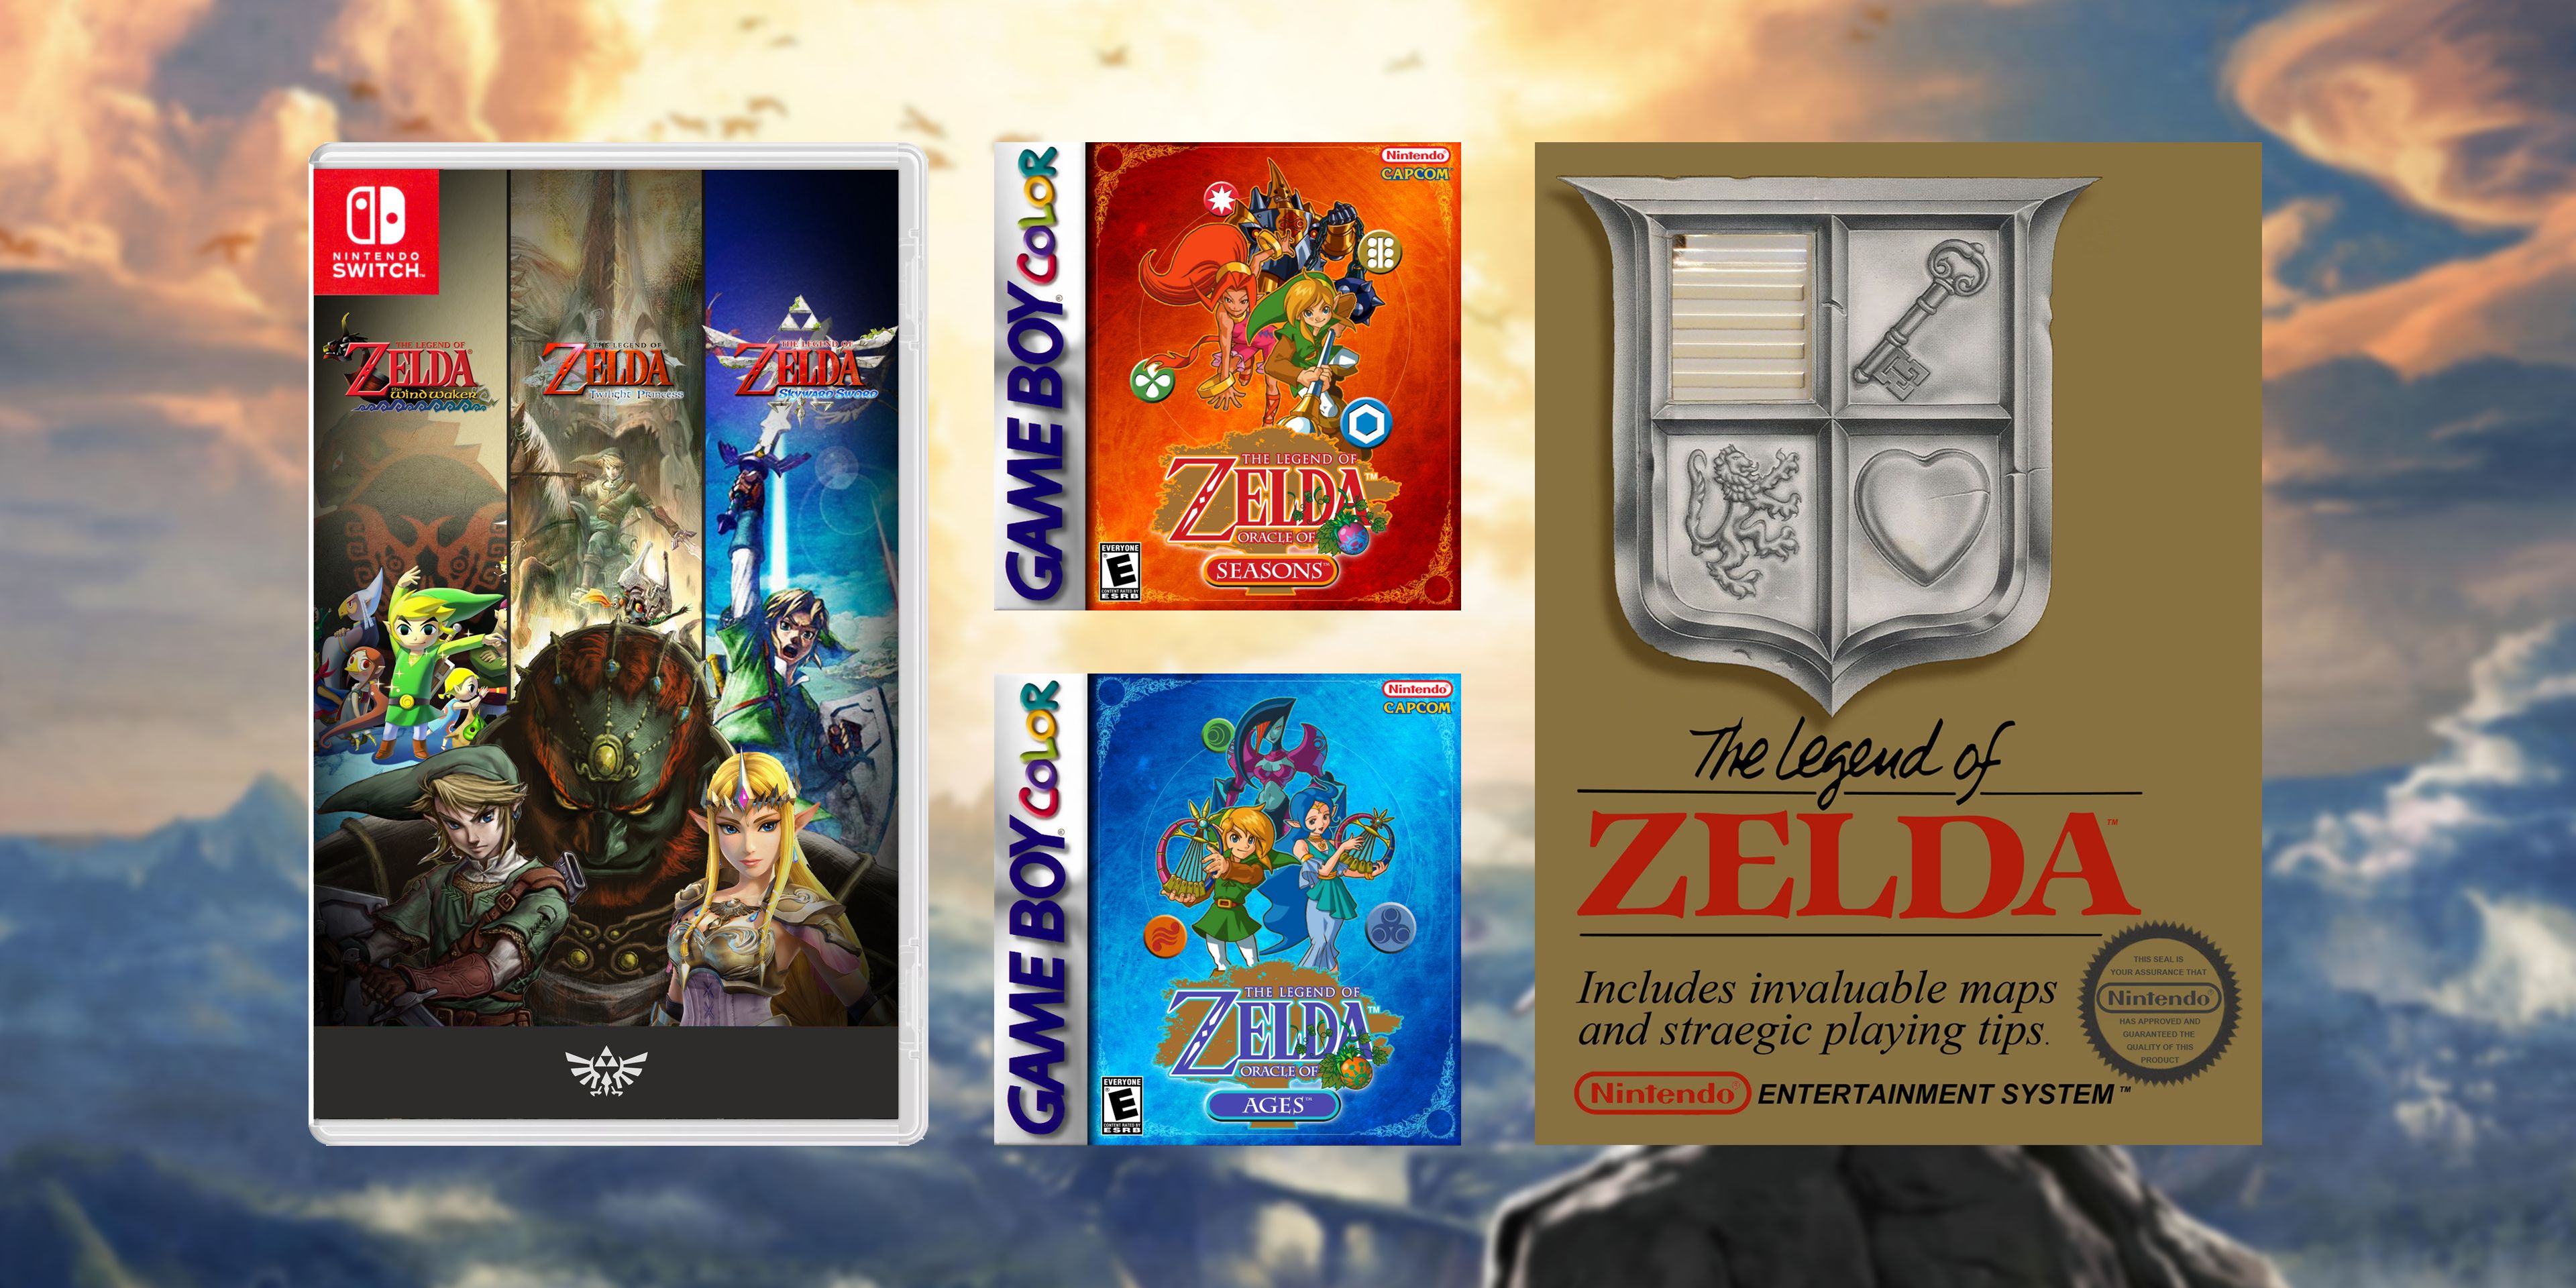 What can we expect from Zelda's 35th anniversary?